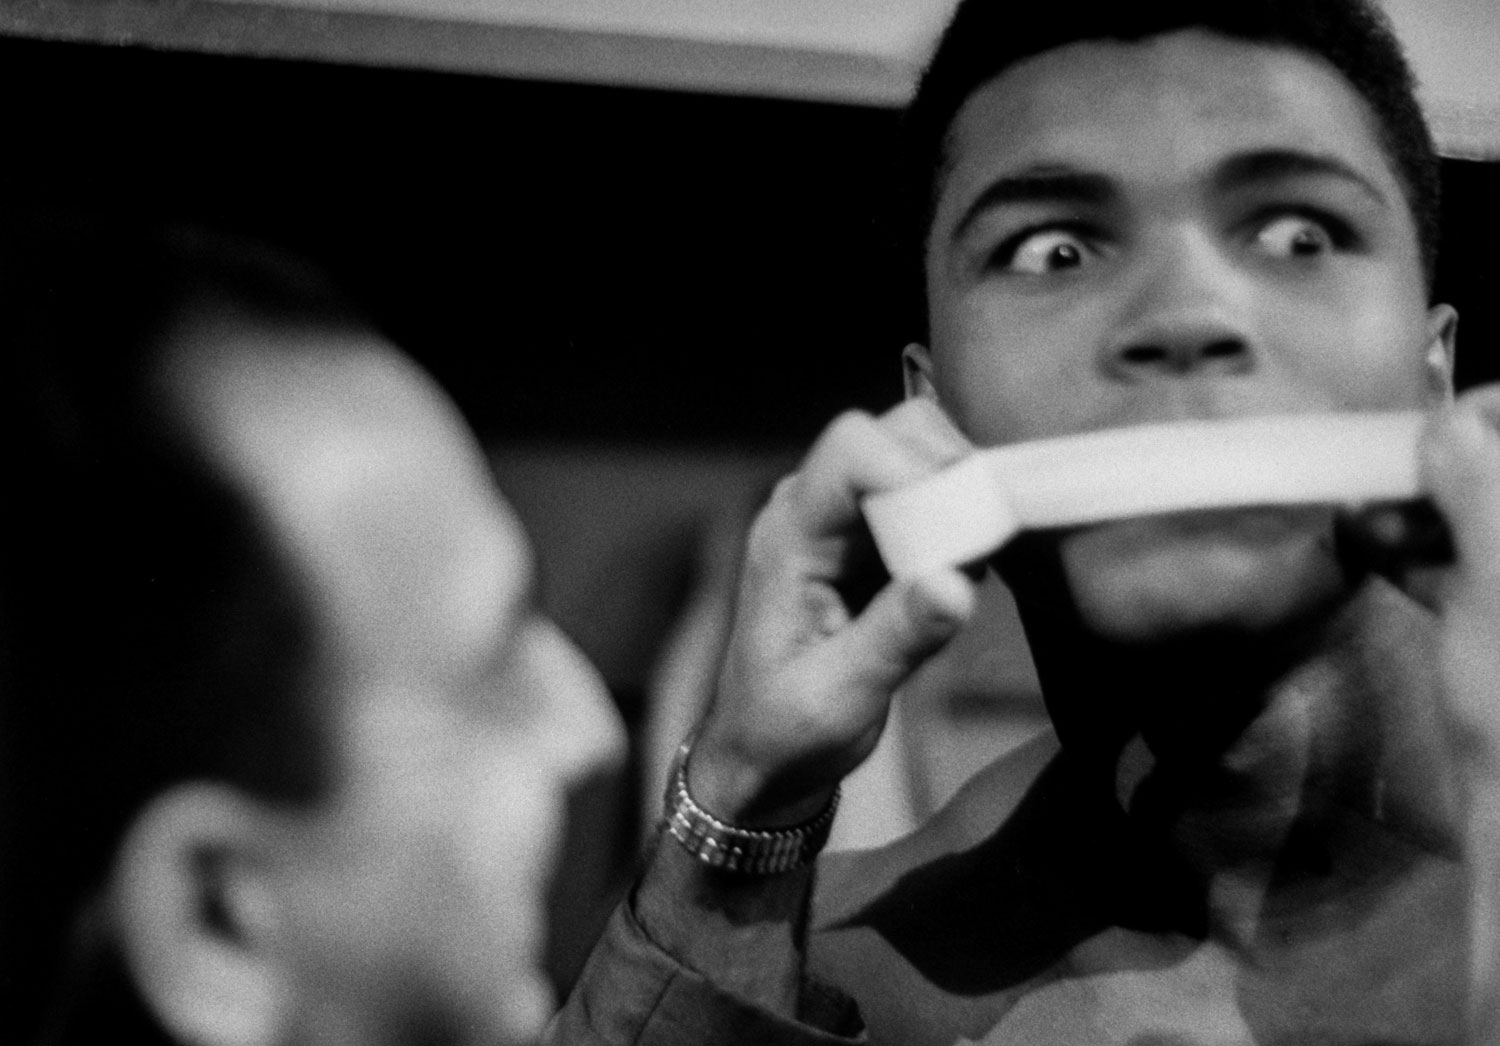 Heavyweight contender Cassius Clay (later Muhammad Ali) getting his poetic mouth taped by trainer Angelo Dundee during his weigh-in before big fight with Doug Jones.